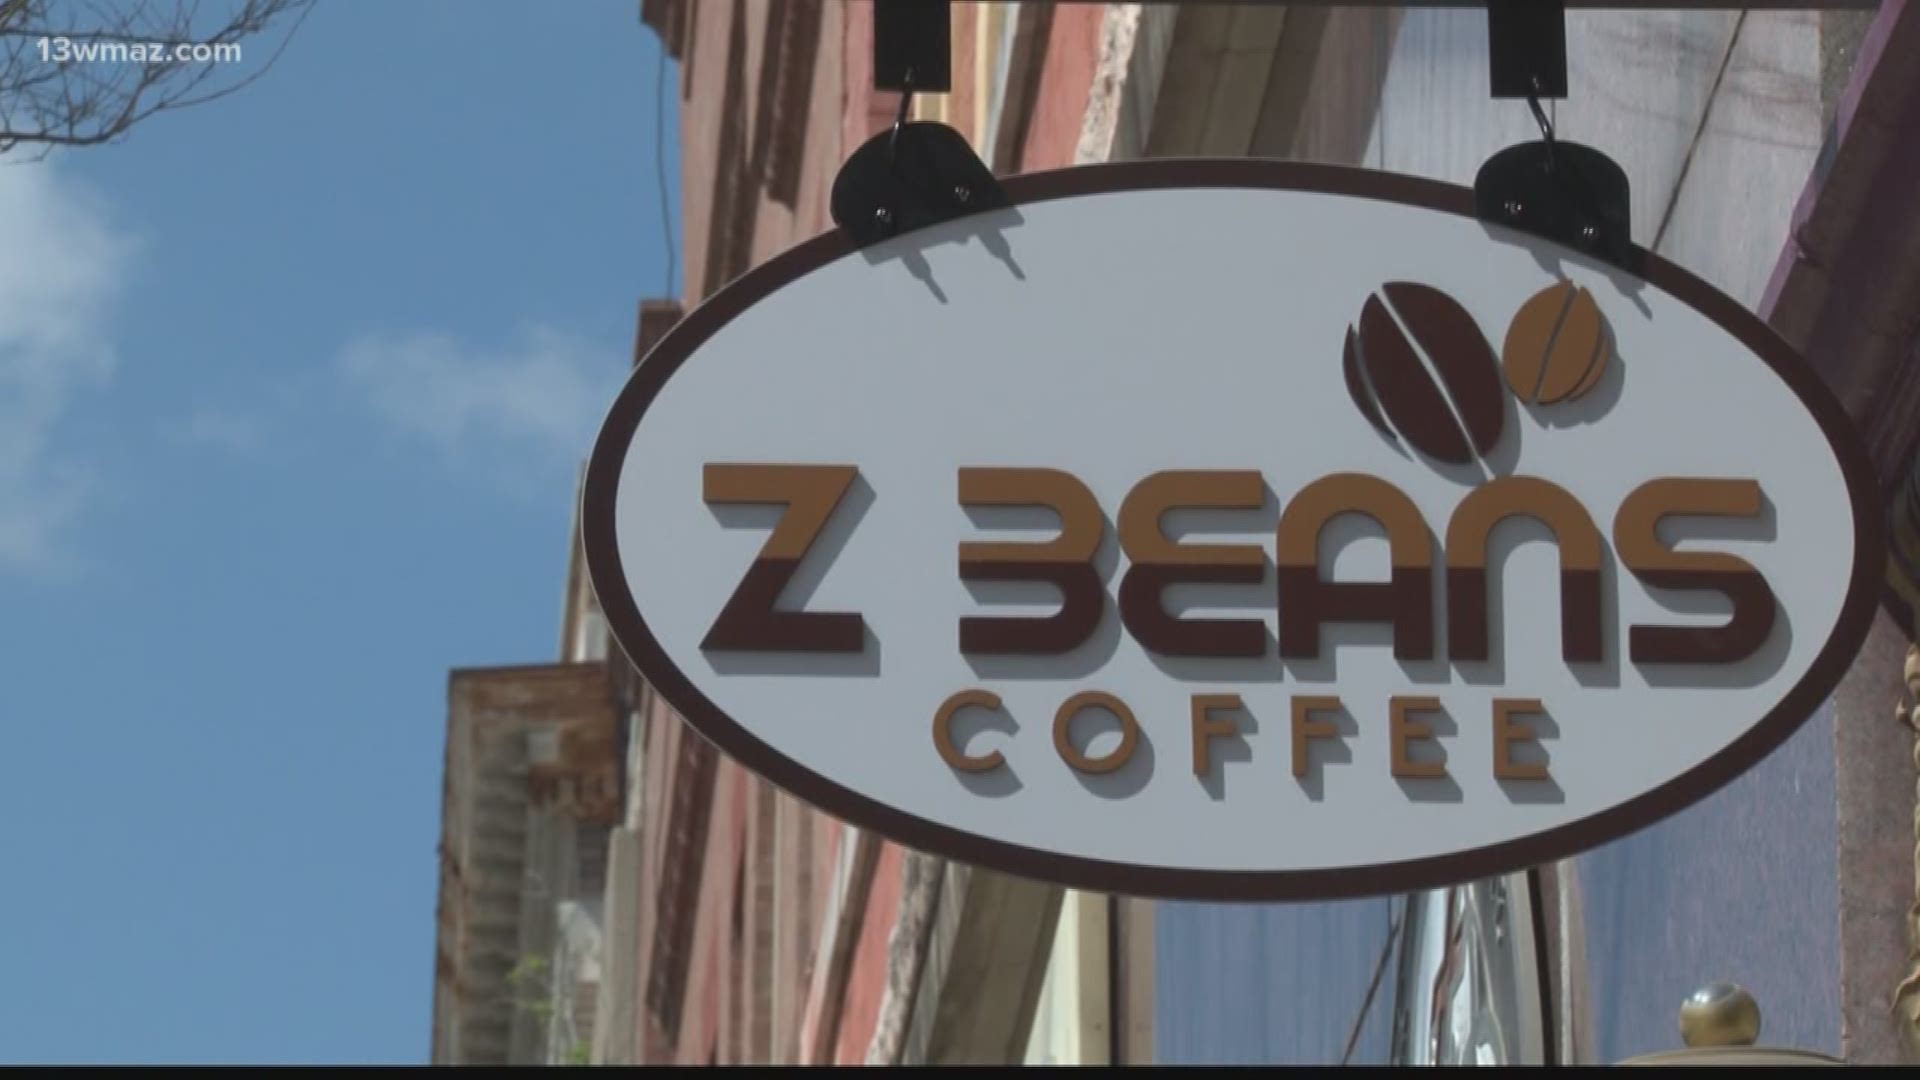 One of Macon's newest up and coming businesses, Z Beans Coffee is opening up a second location right in downtown Macon. Our Junior Journalist got to talk to founder Shane Buerster about what's next for the coffee shop and what makes them different.